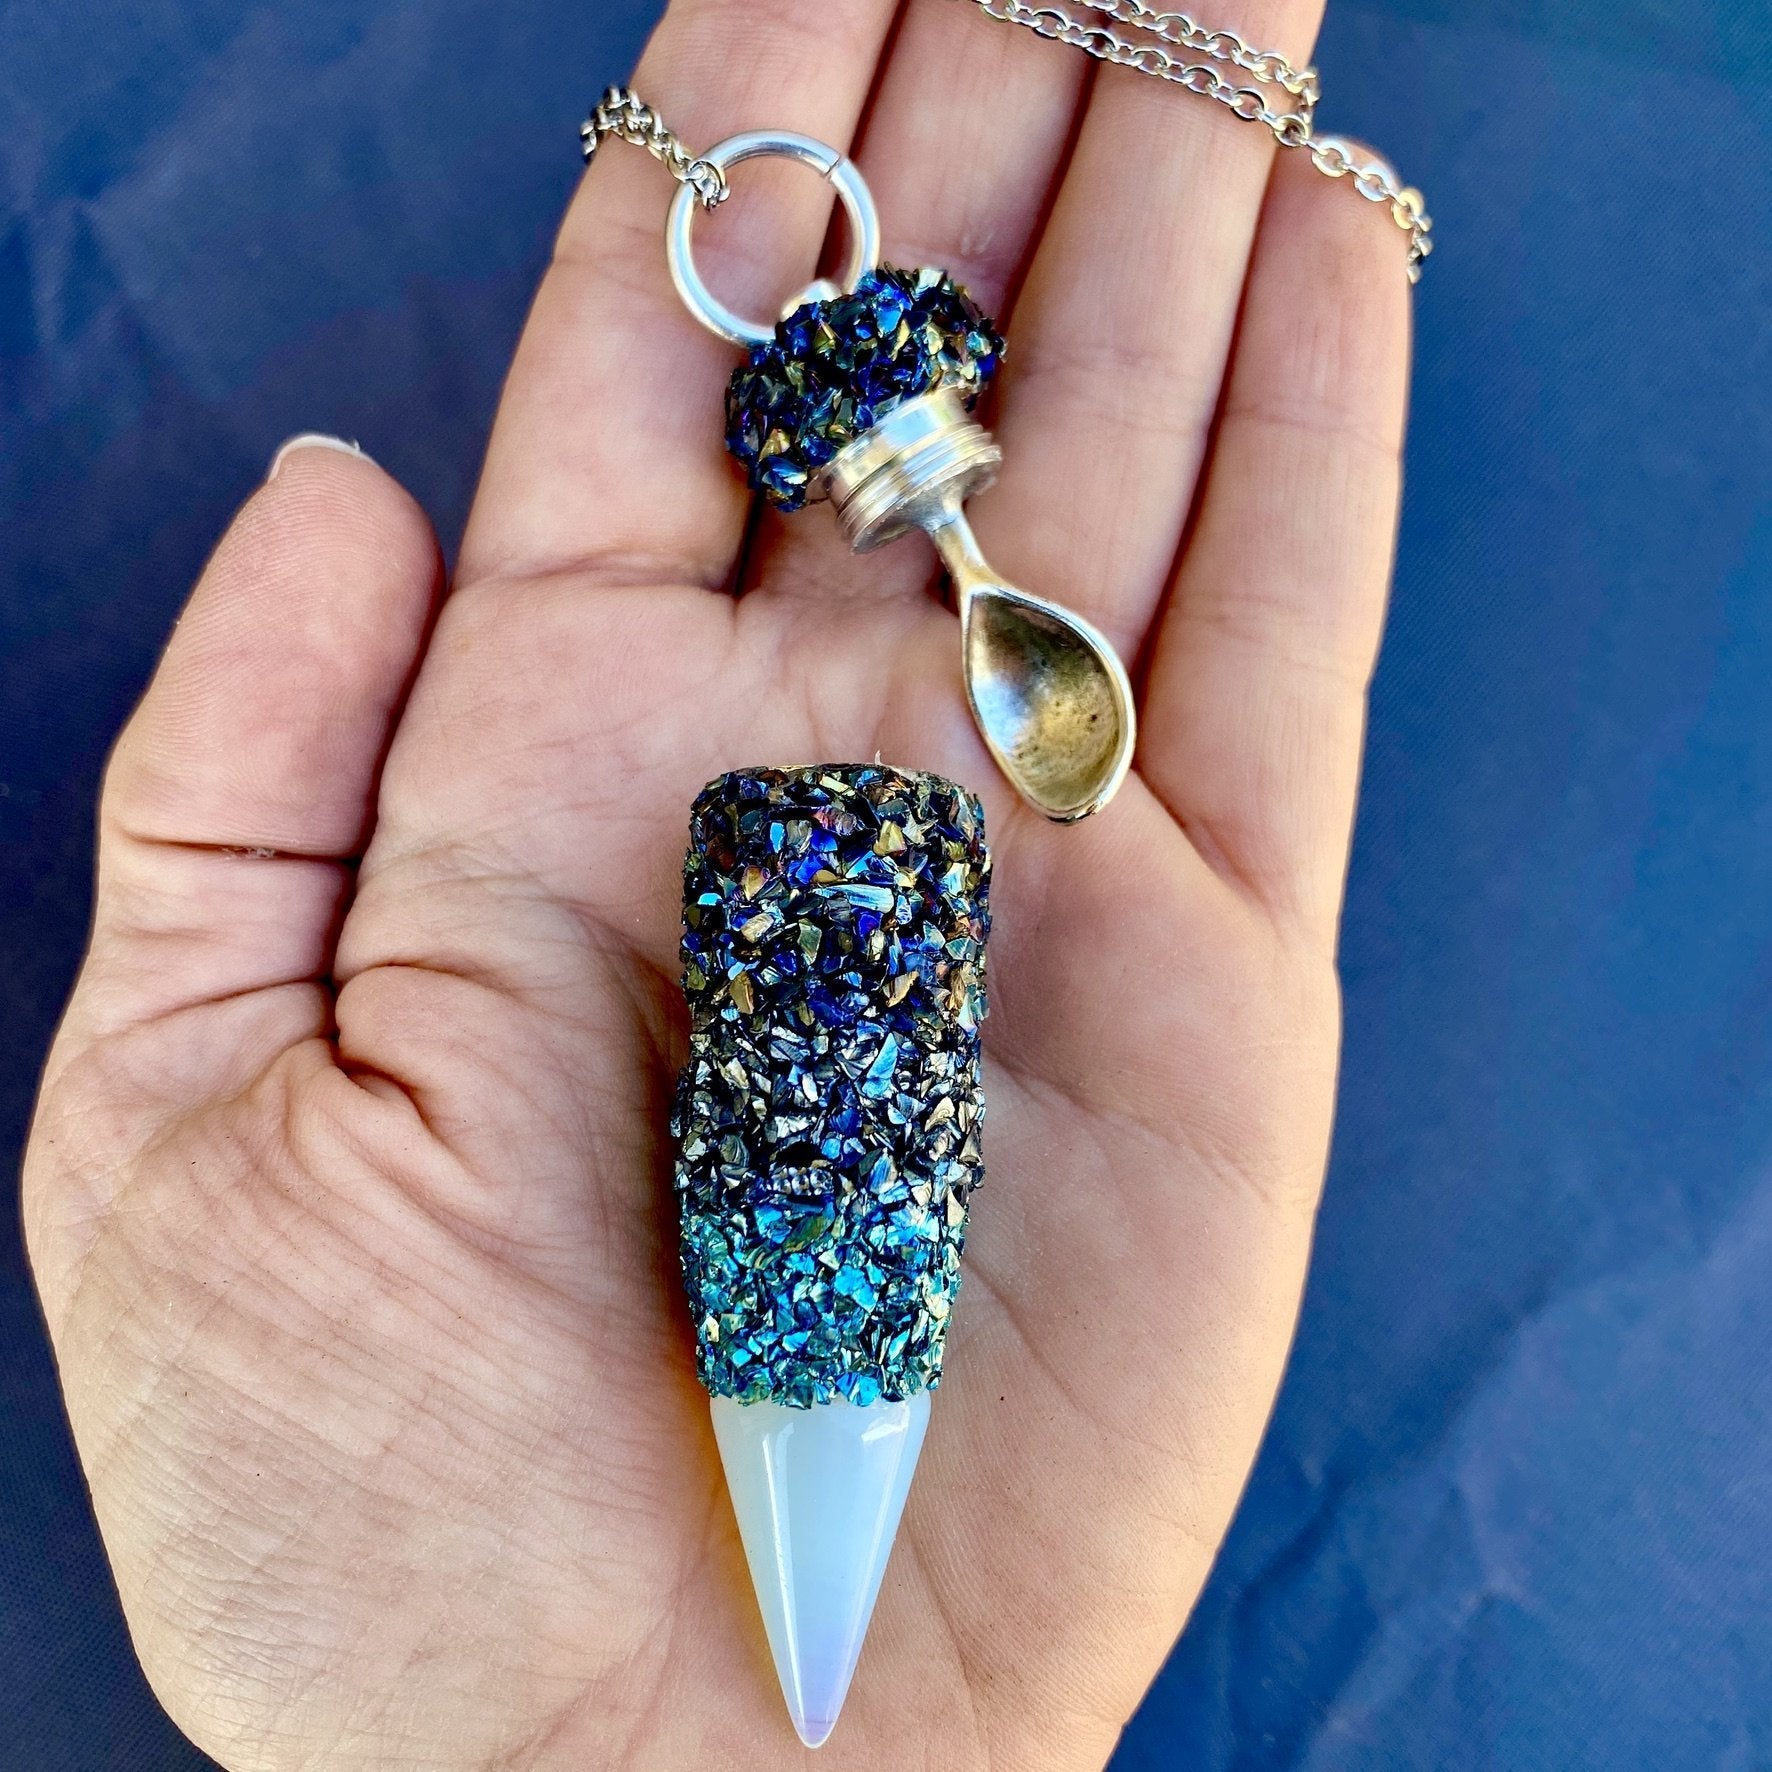 Stash Necklace With Spoon – Rave Fashion Goddess